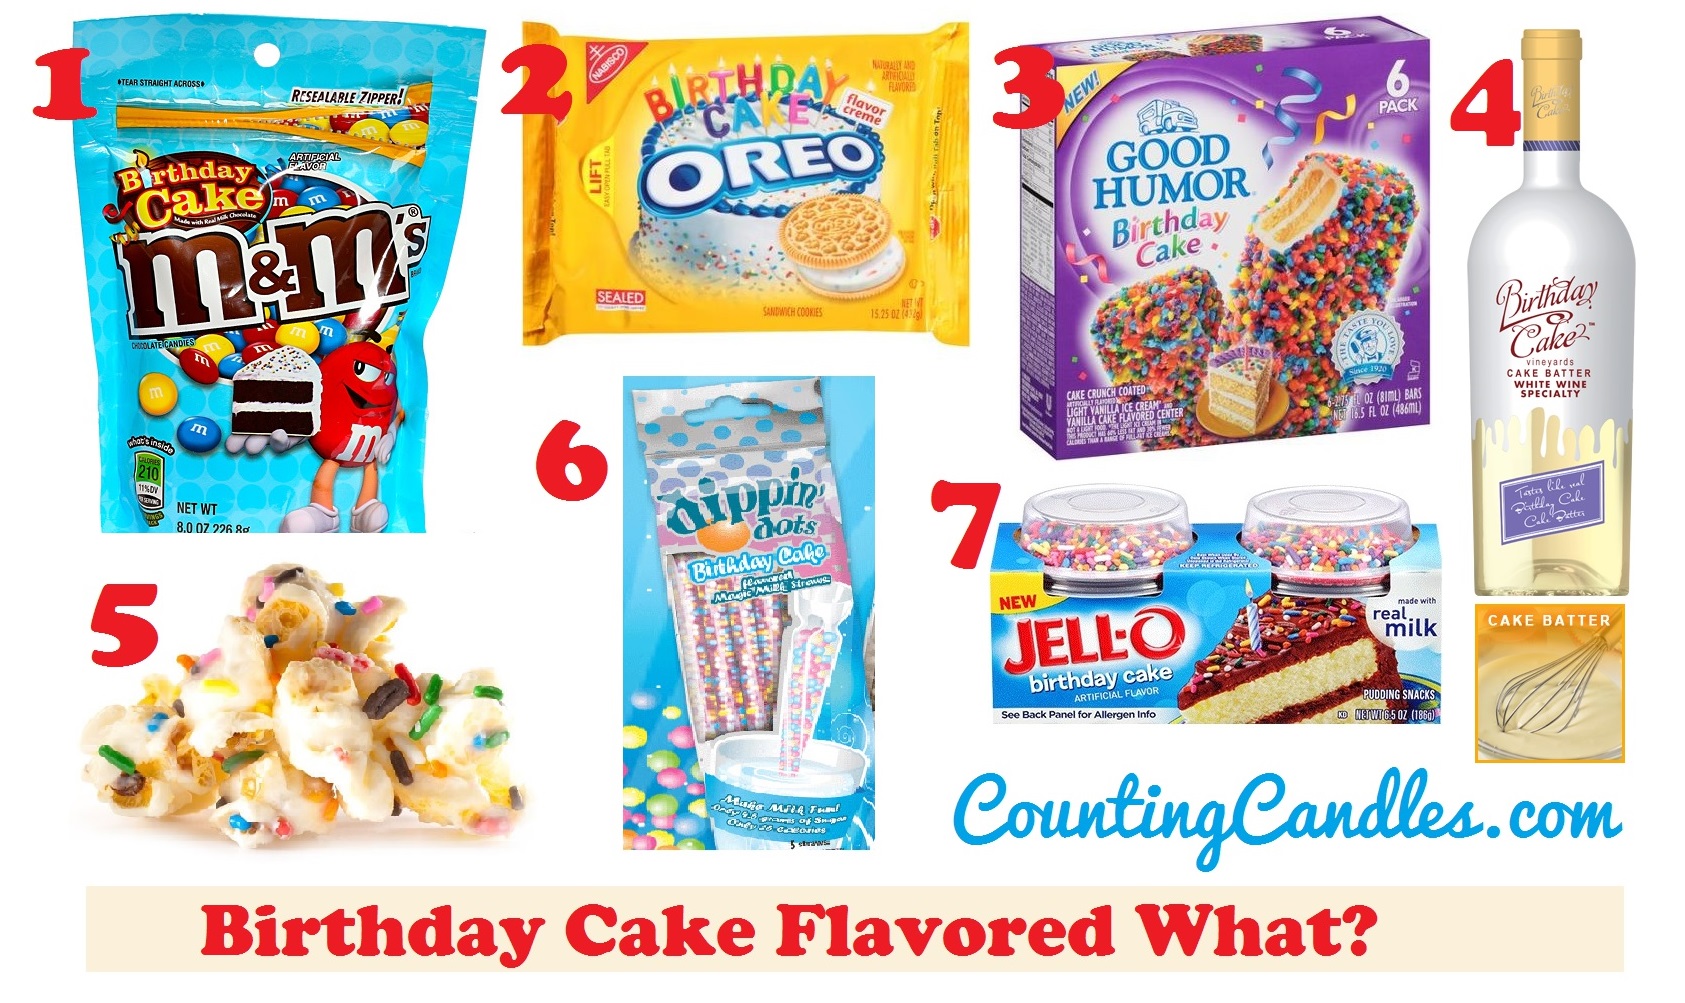 What?! 7 Birthday Cake Flavored Food and Drinks